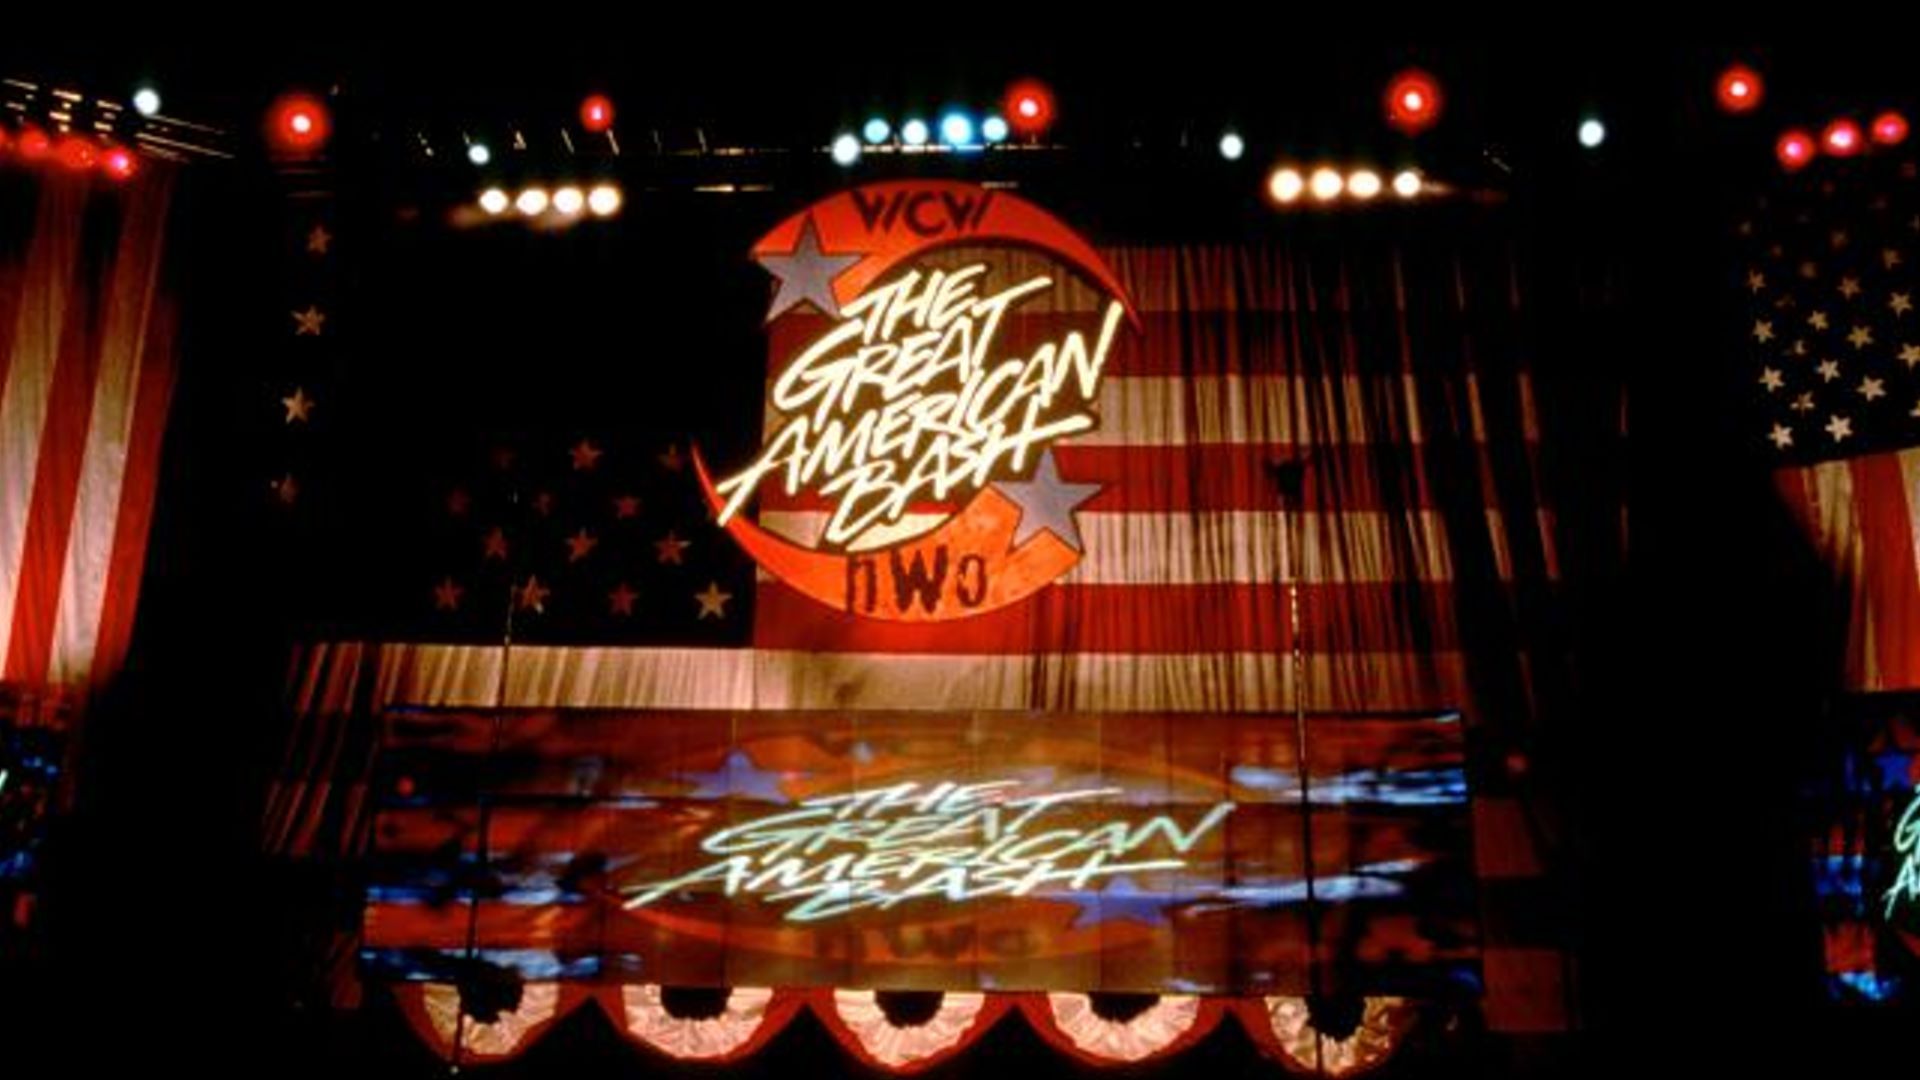 WCW The Great American Bash 1998 Backdrop